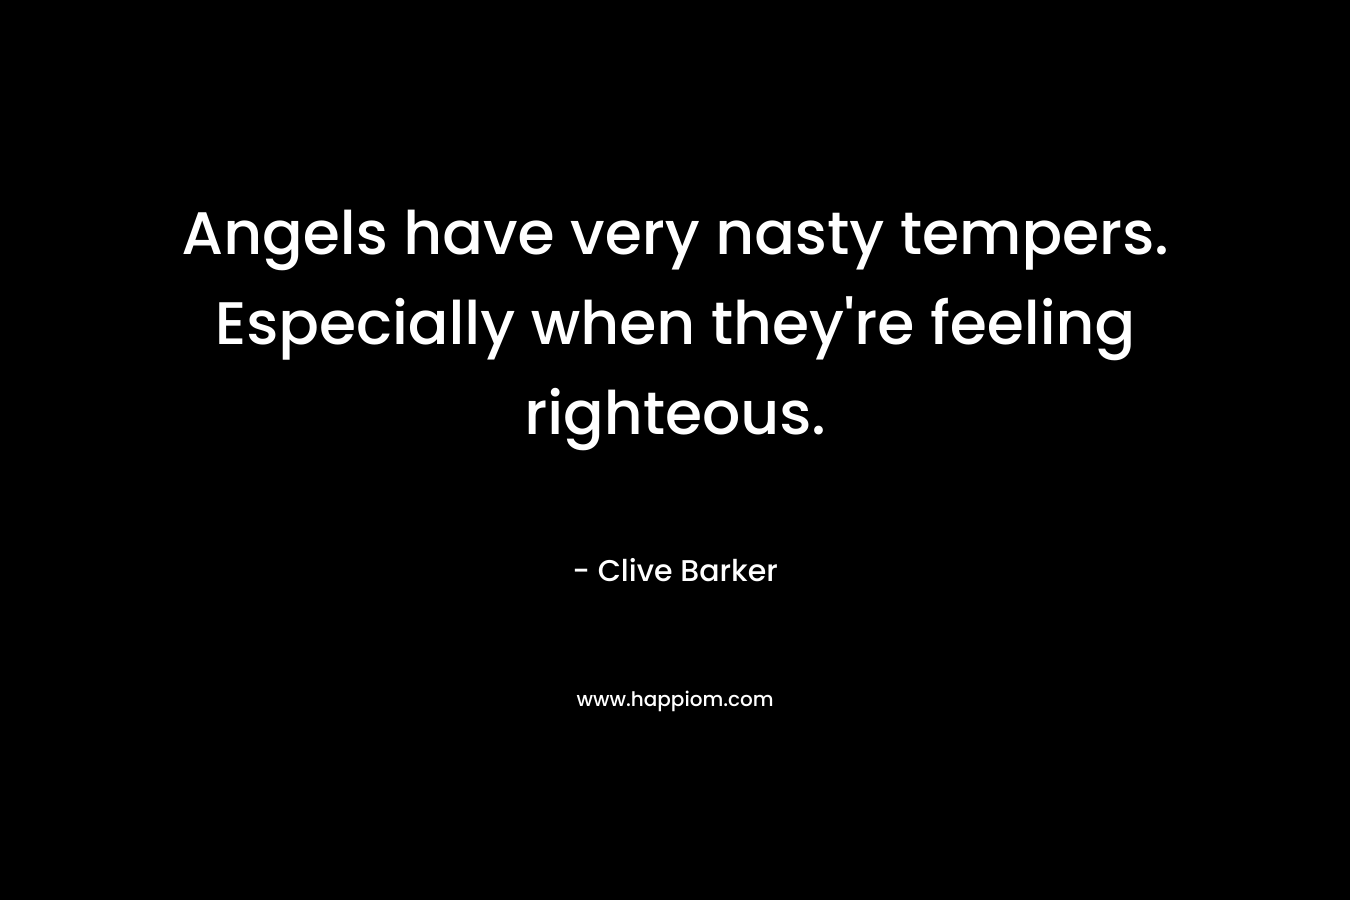 Angels have very nasty tempers. Especially when they’re feeling righteous. – Clive Barker